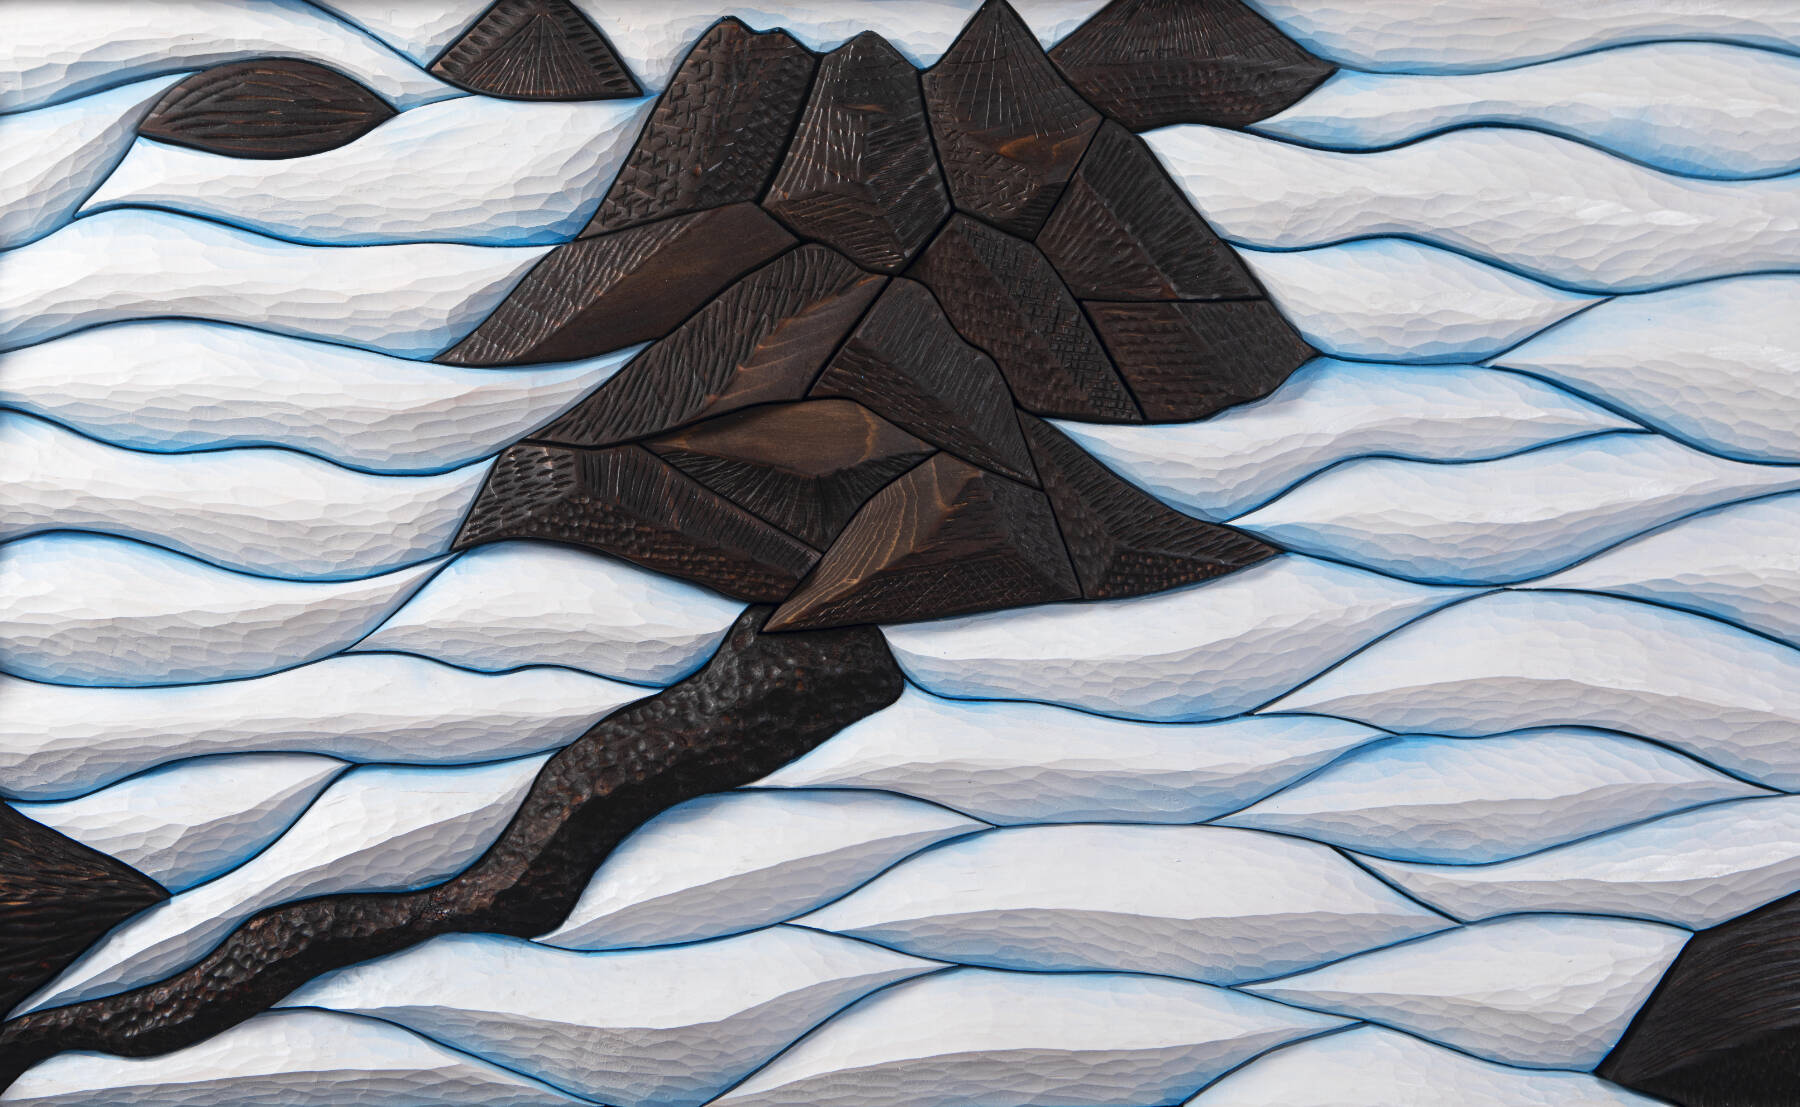 “Grewingk Glacier” by Deb Lowney, made from spruce wood, oil paint and air brushing, was part of the 2022-23 Changing Landscapes exhibit at Bunnell Street Arts Center. Photo provided by Deb Lowney